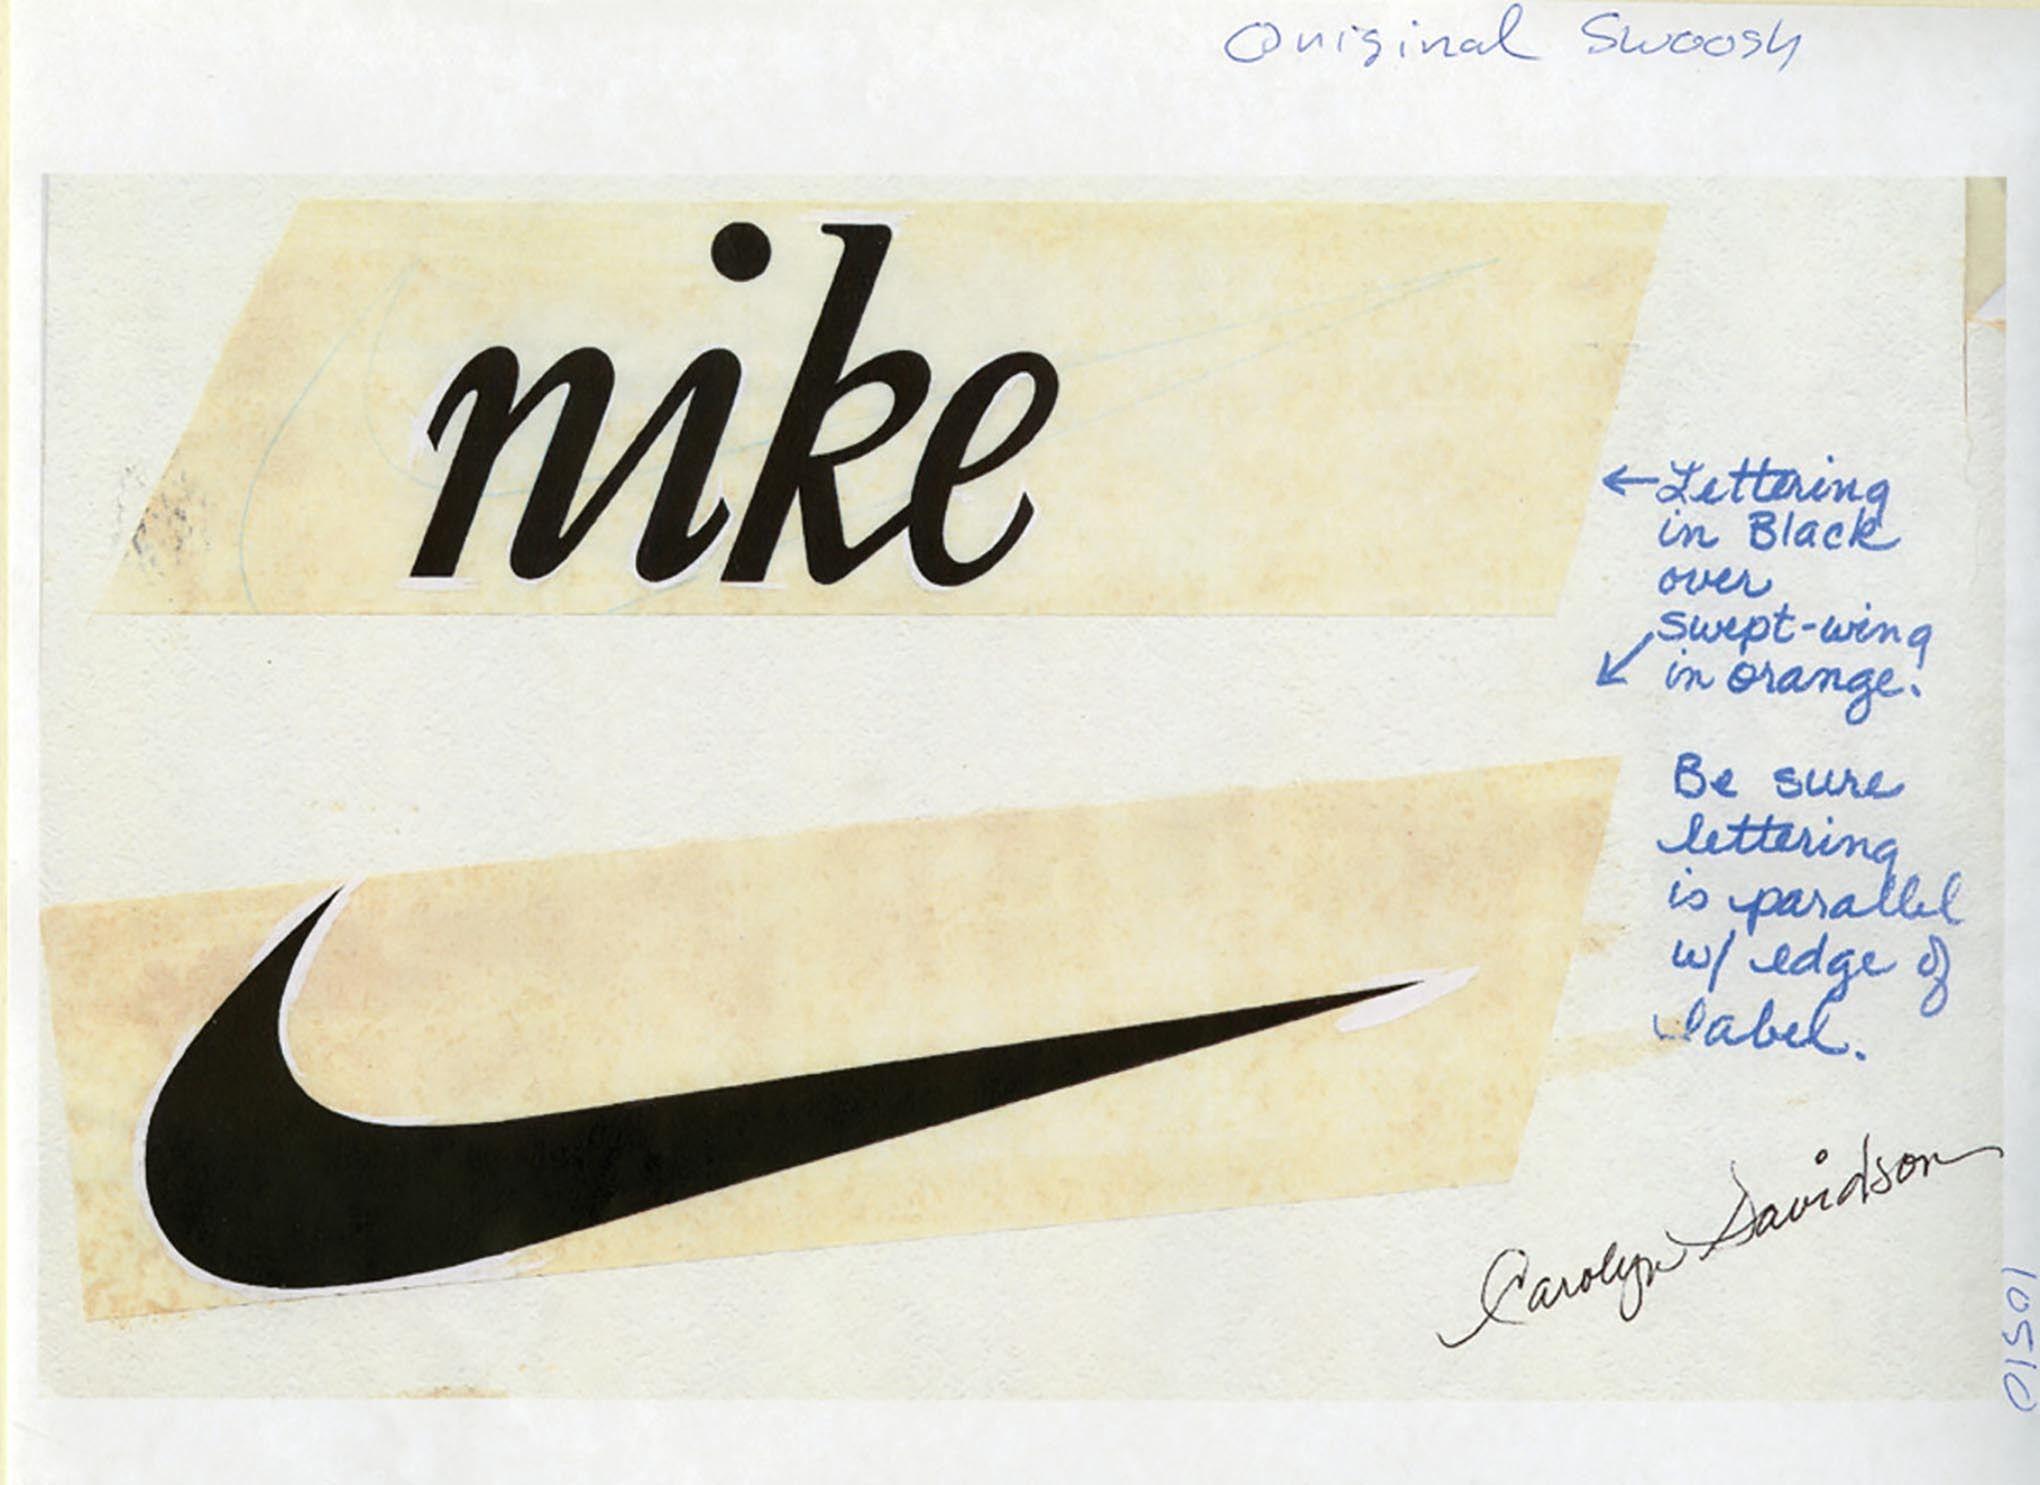 Original Nike Logo - From a swoosh to a smile: the power of logos | Johnson Banks